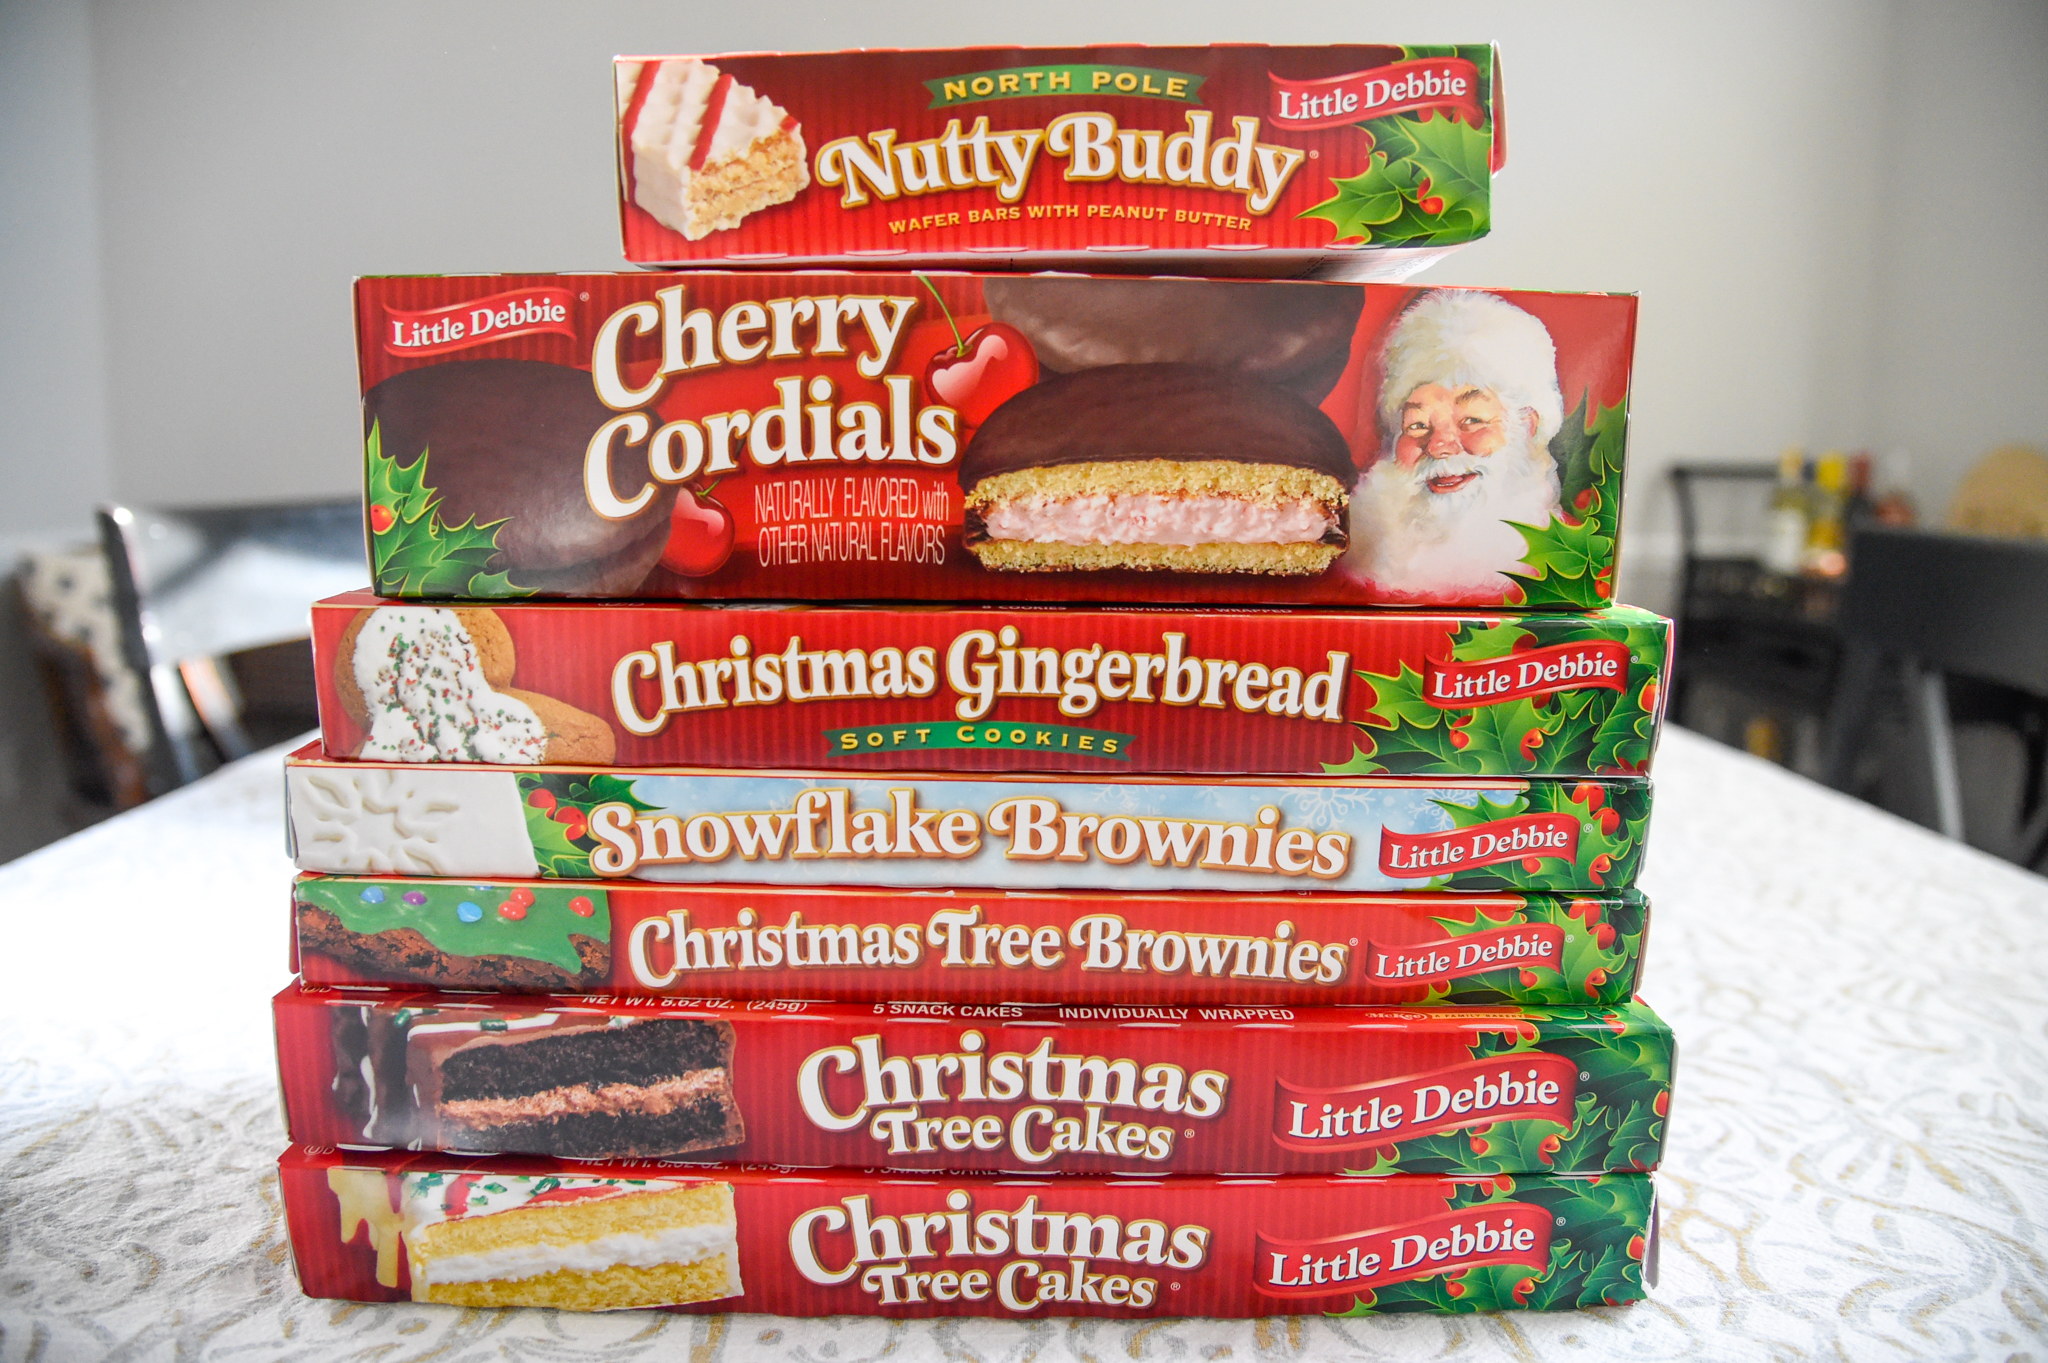 Every Little Debbie Christmas Snack Cake, Ranked